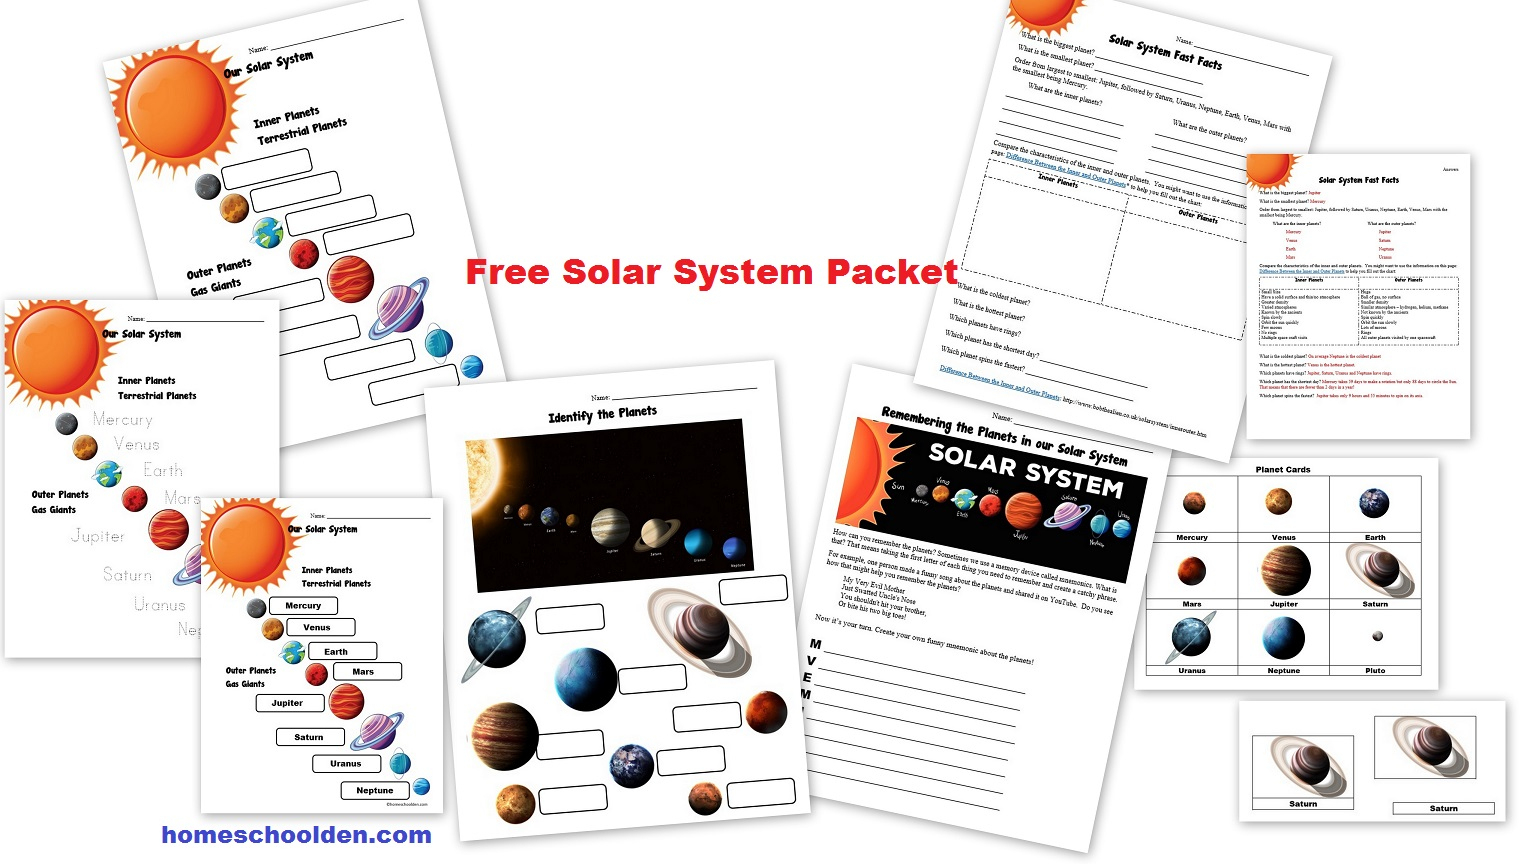 Free Planets Of The Solar System Worksheets - Homeschool Den - Free Printable Solar System Worksheets